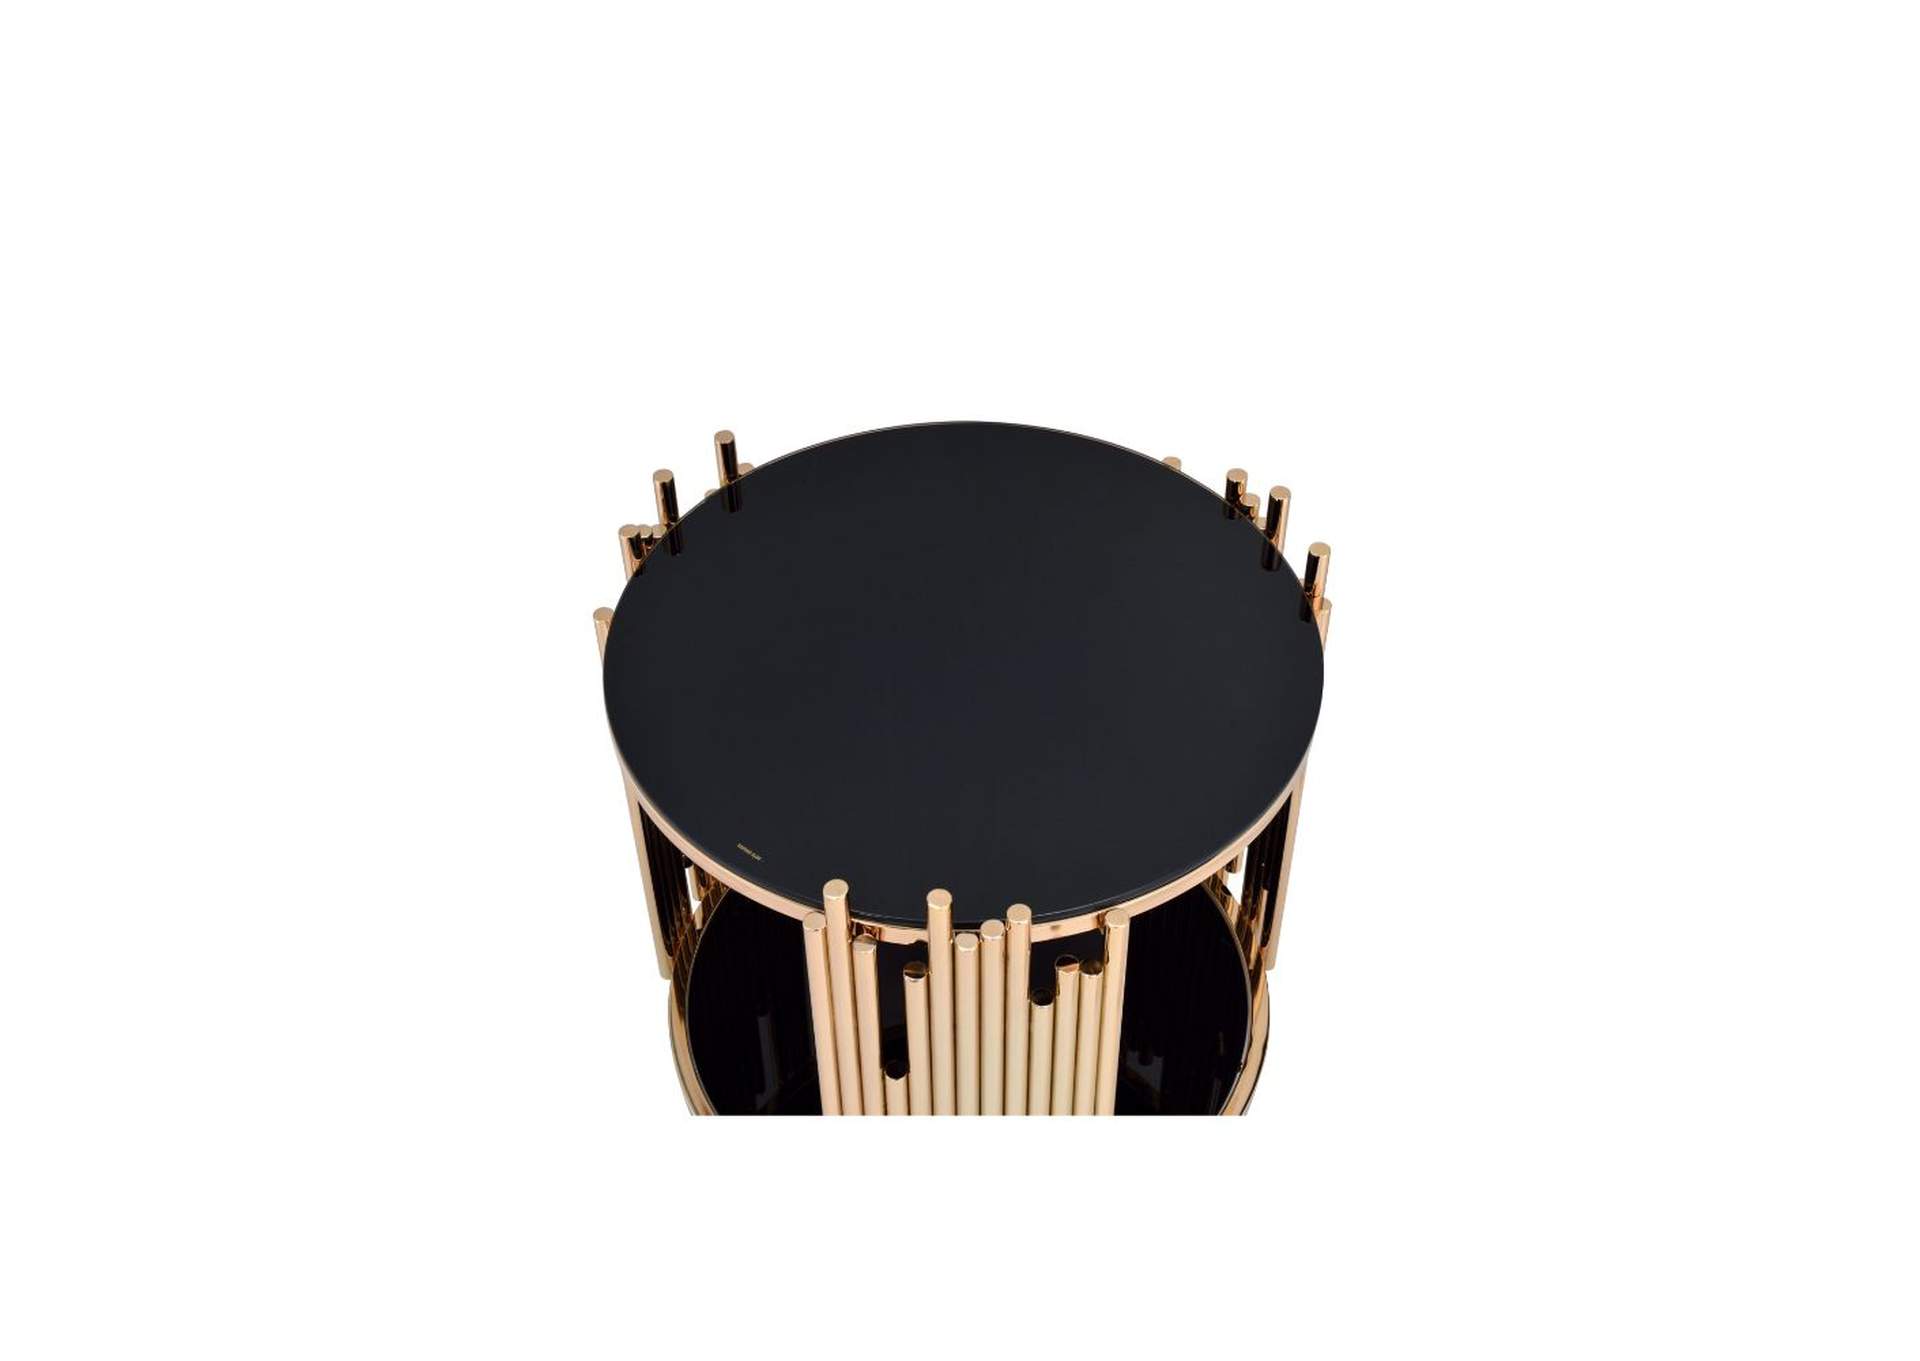 Tanquin Gold Black Glass End Table,Acme